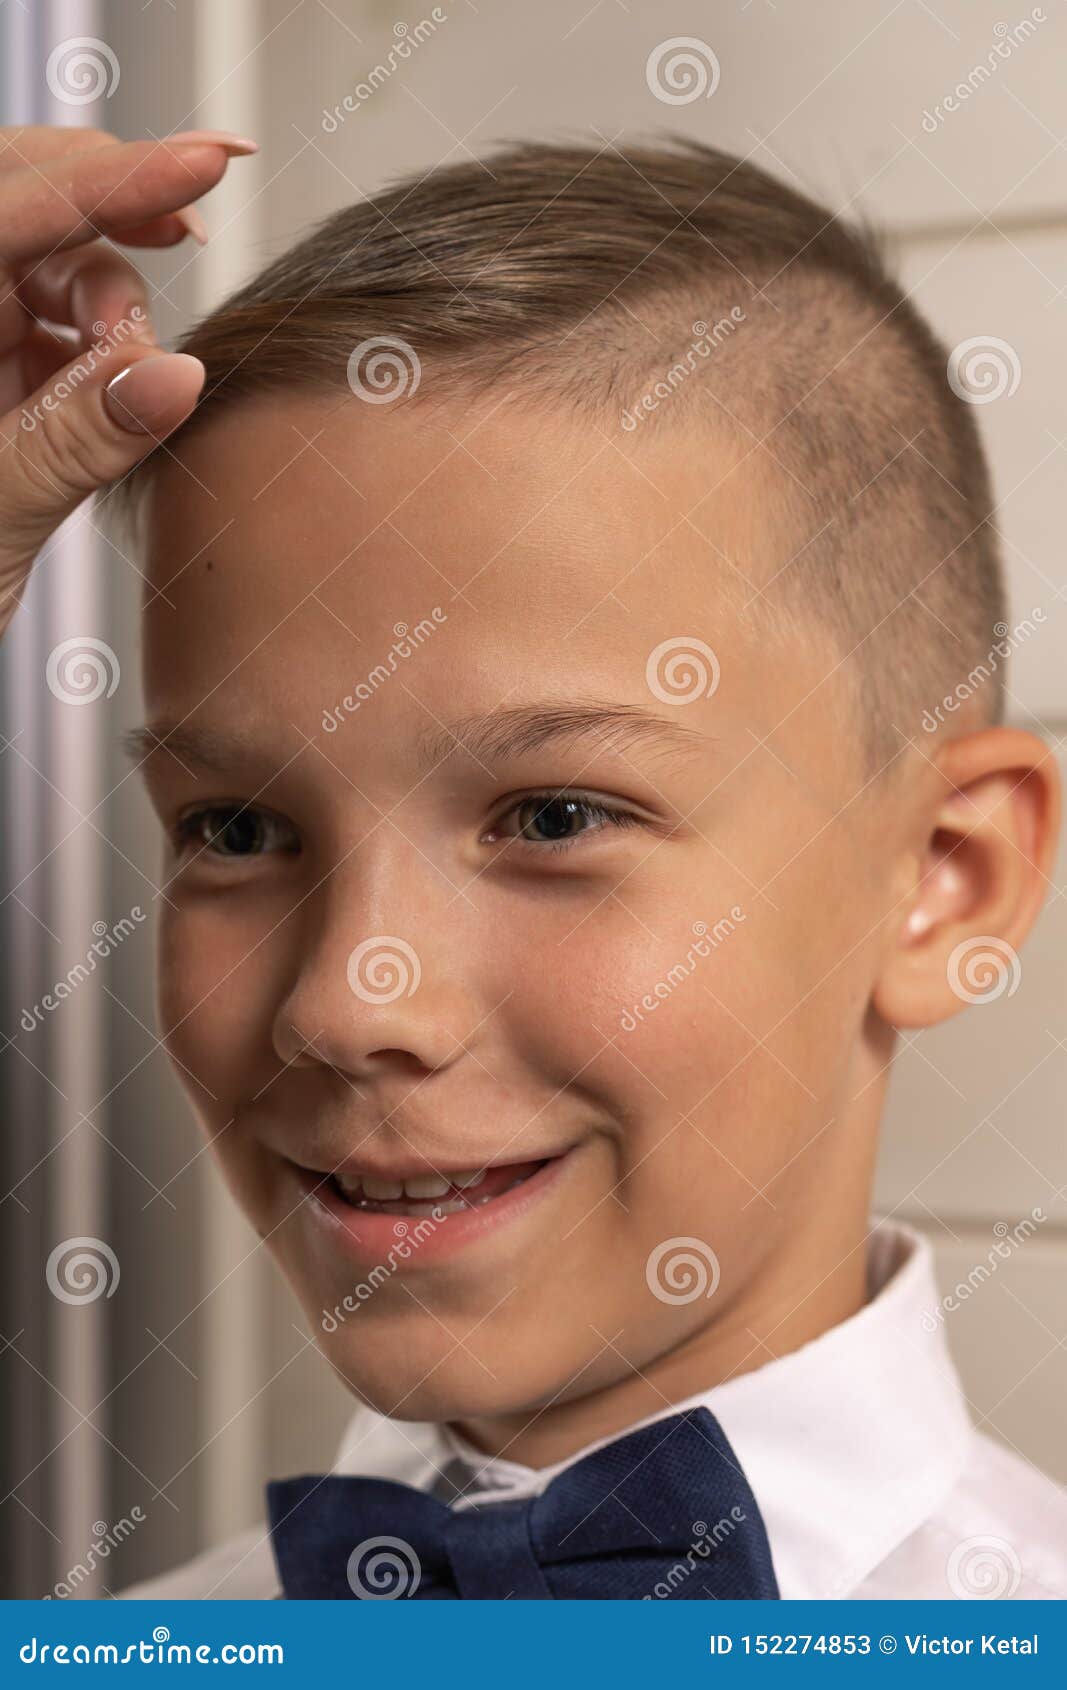 A 10-year-old Boy Prepares for School after a Long Summer Break. Back To  School Stock Image - Image of portrait, casual: 152274853